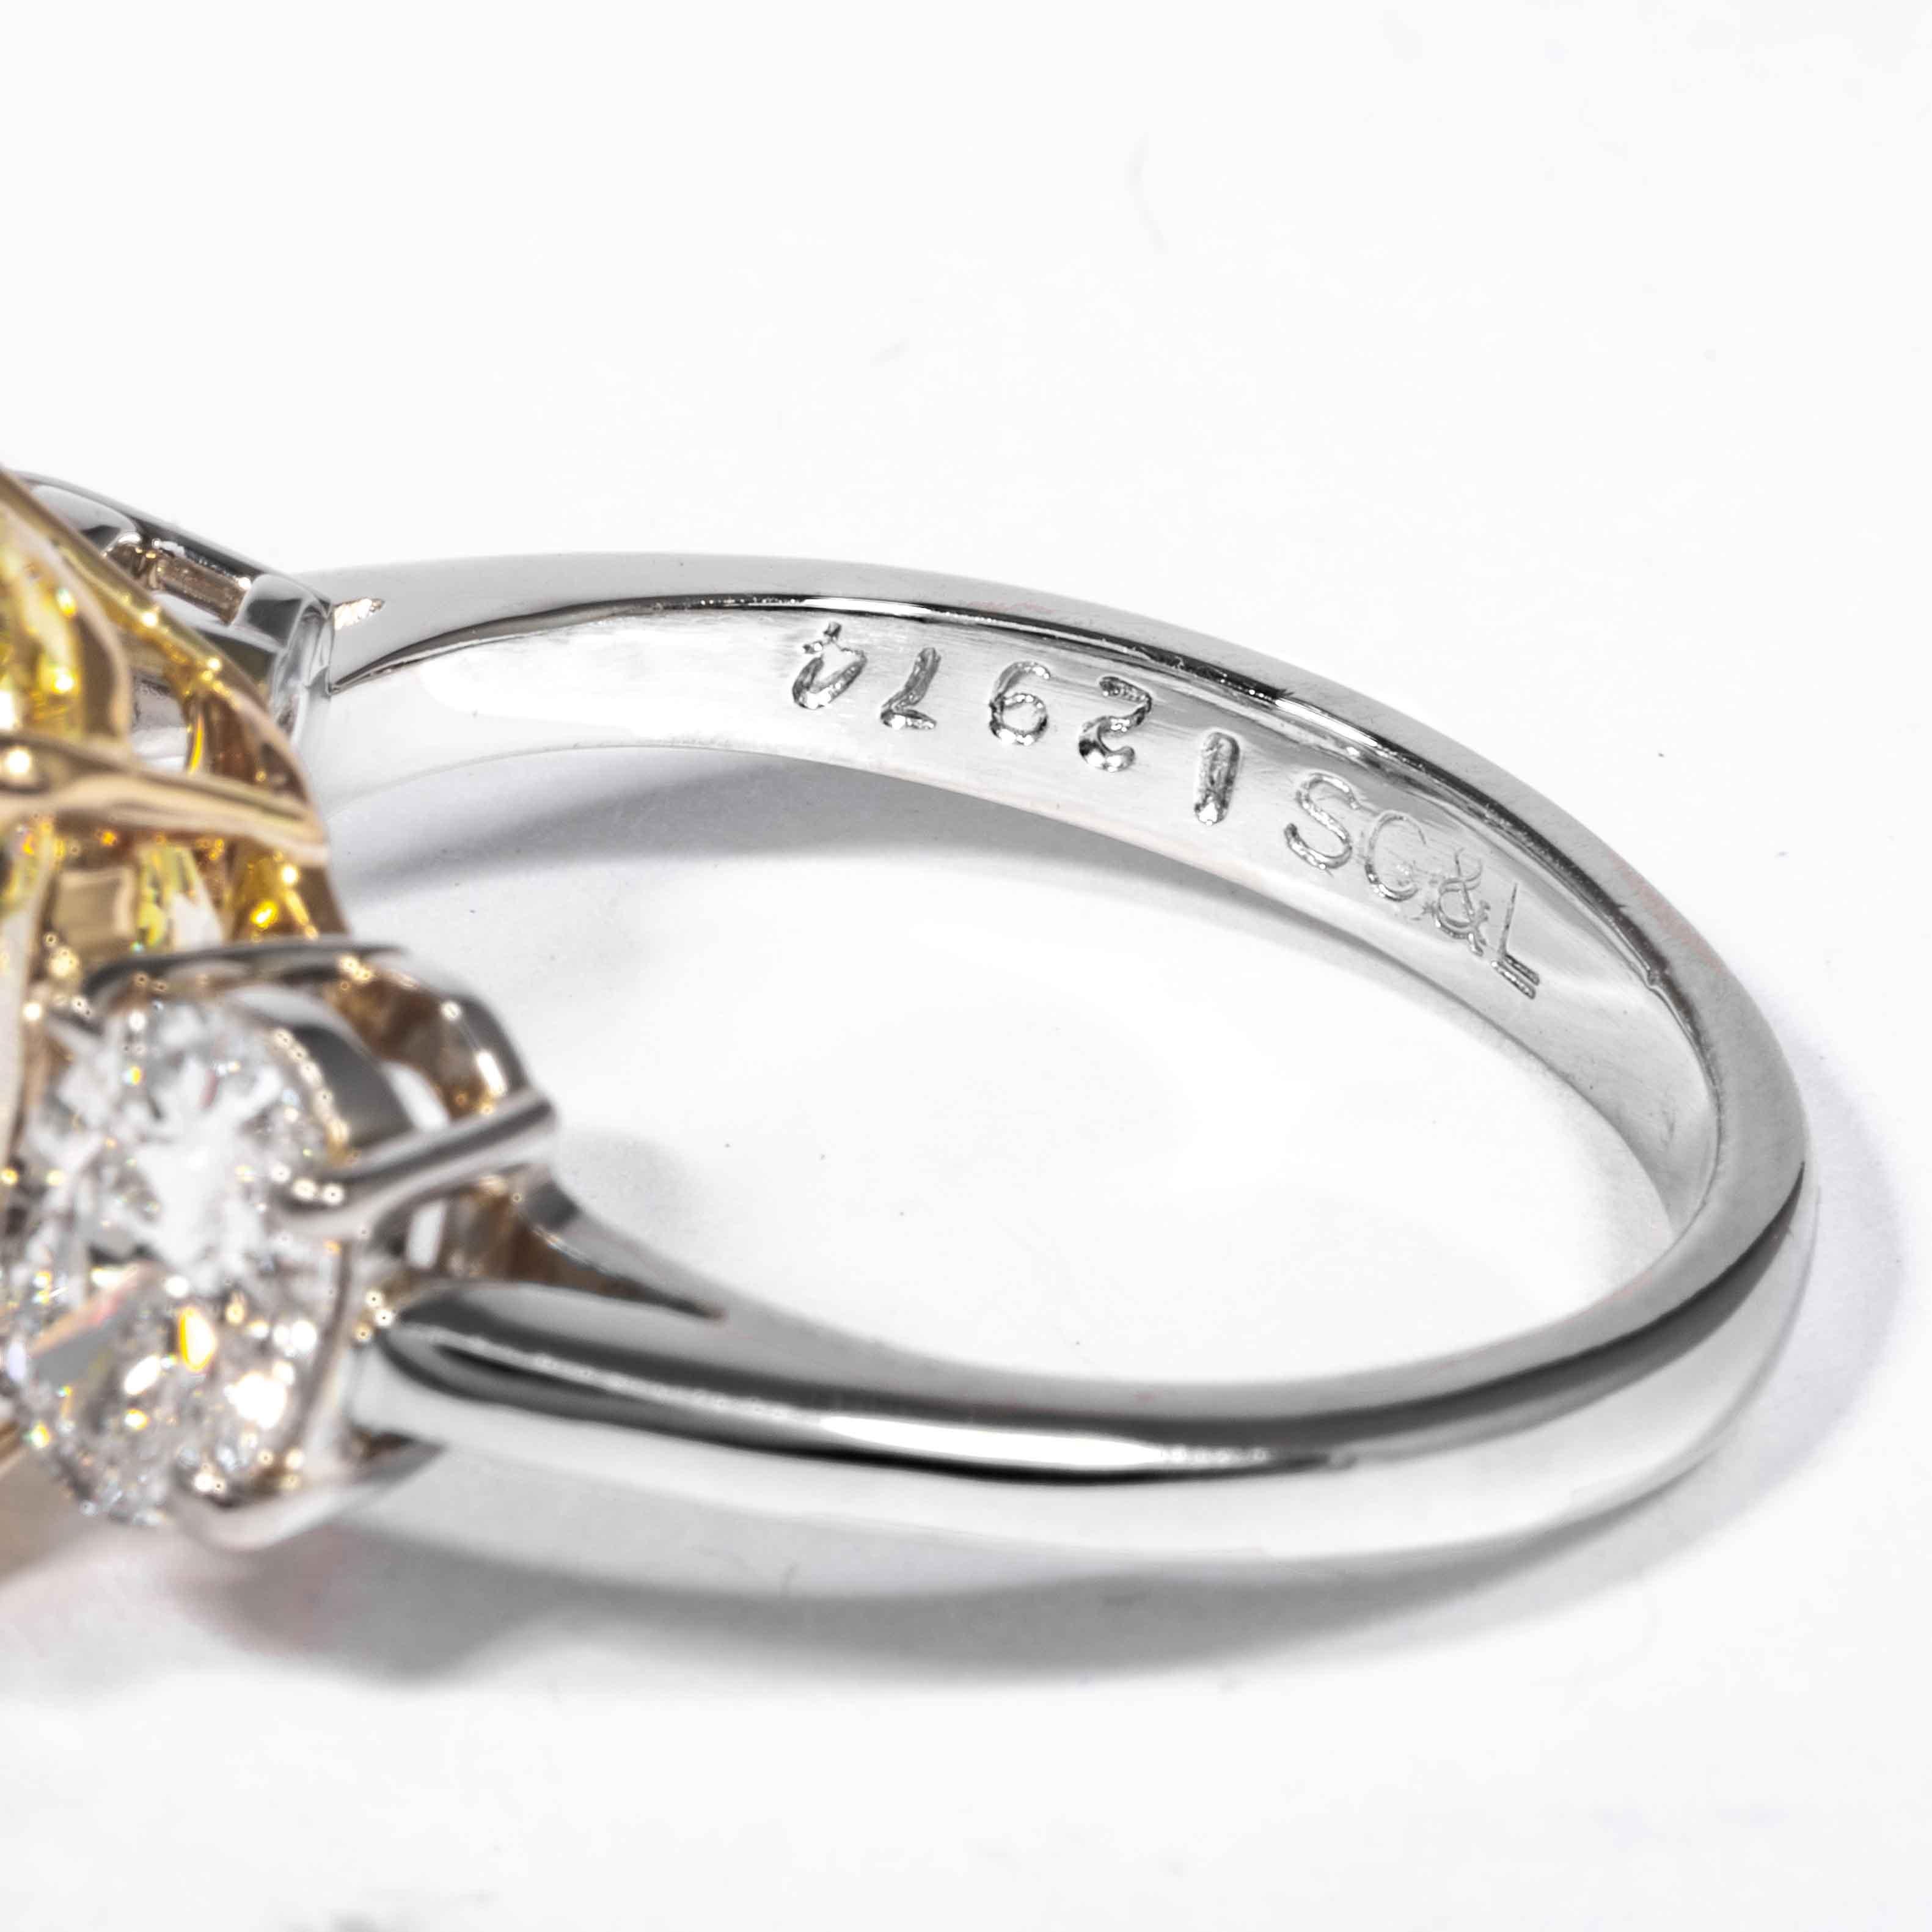 Shreve, Crump & Low GIA Certified 4.55 Carat Fancy Yellow Oval Diamond Ring In New Condition For Sale In Boston, MA